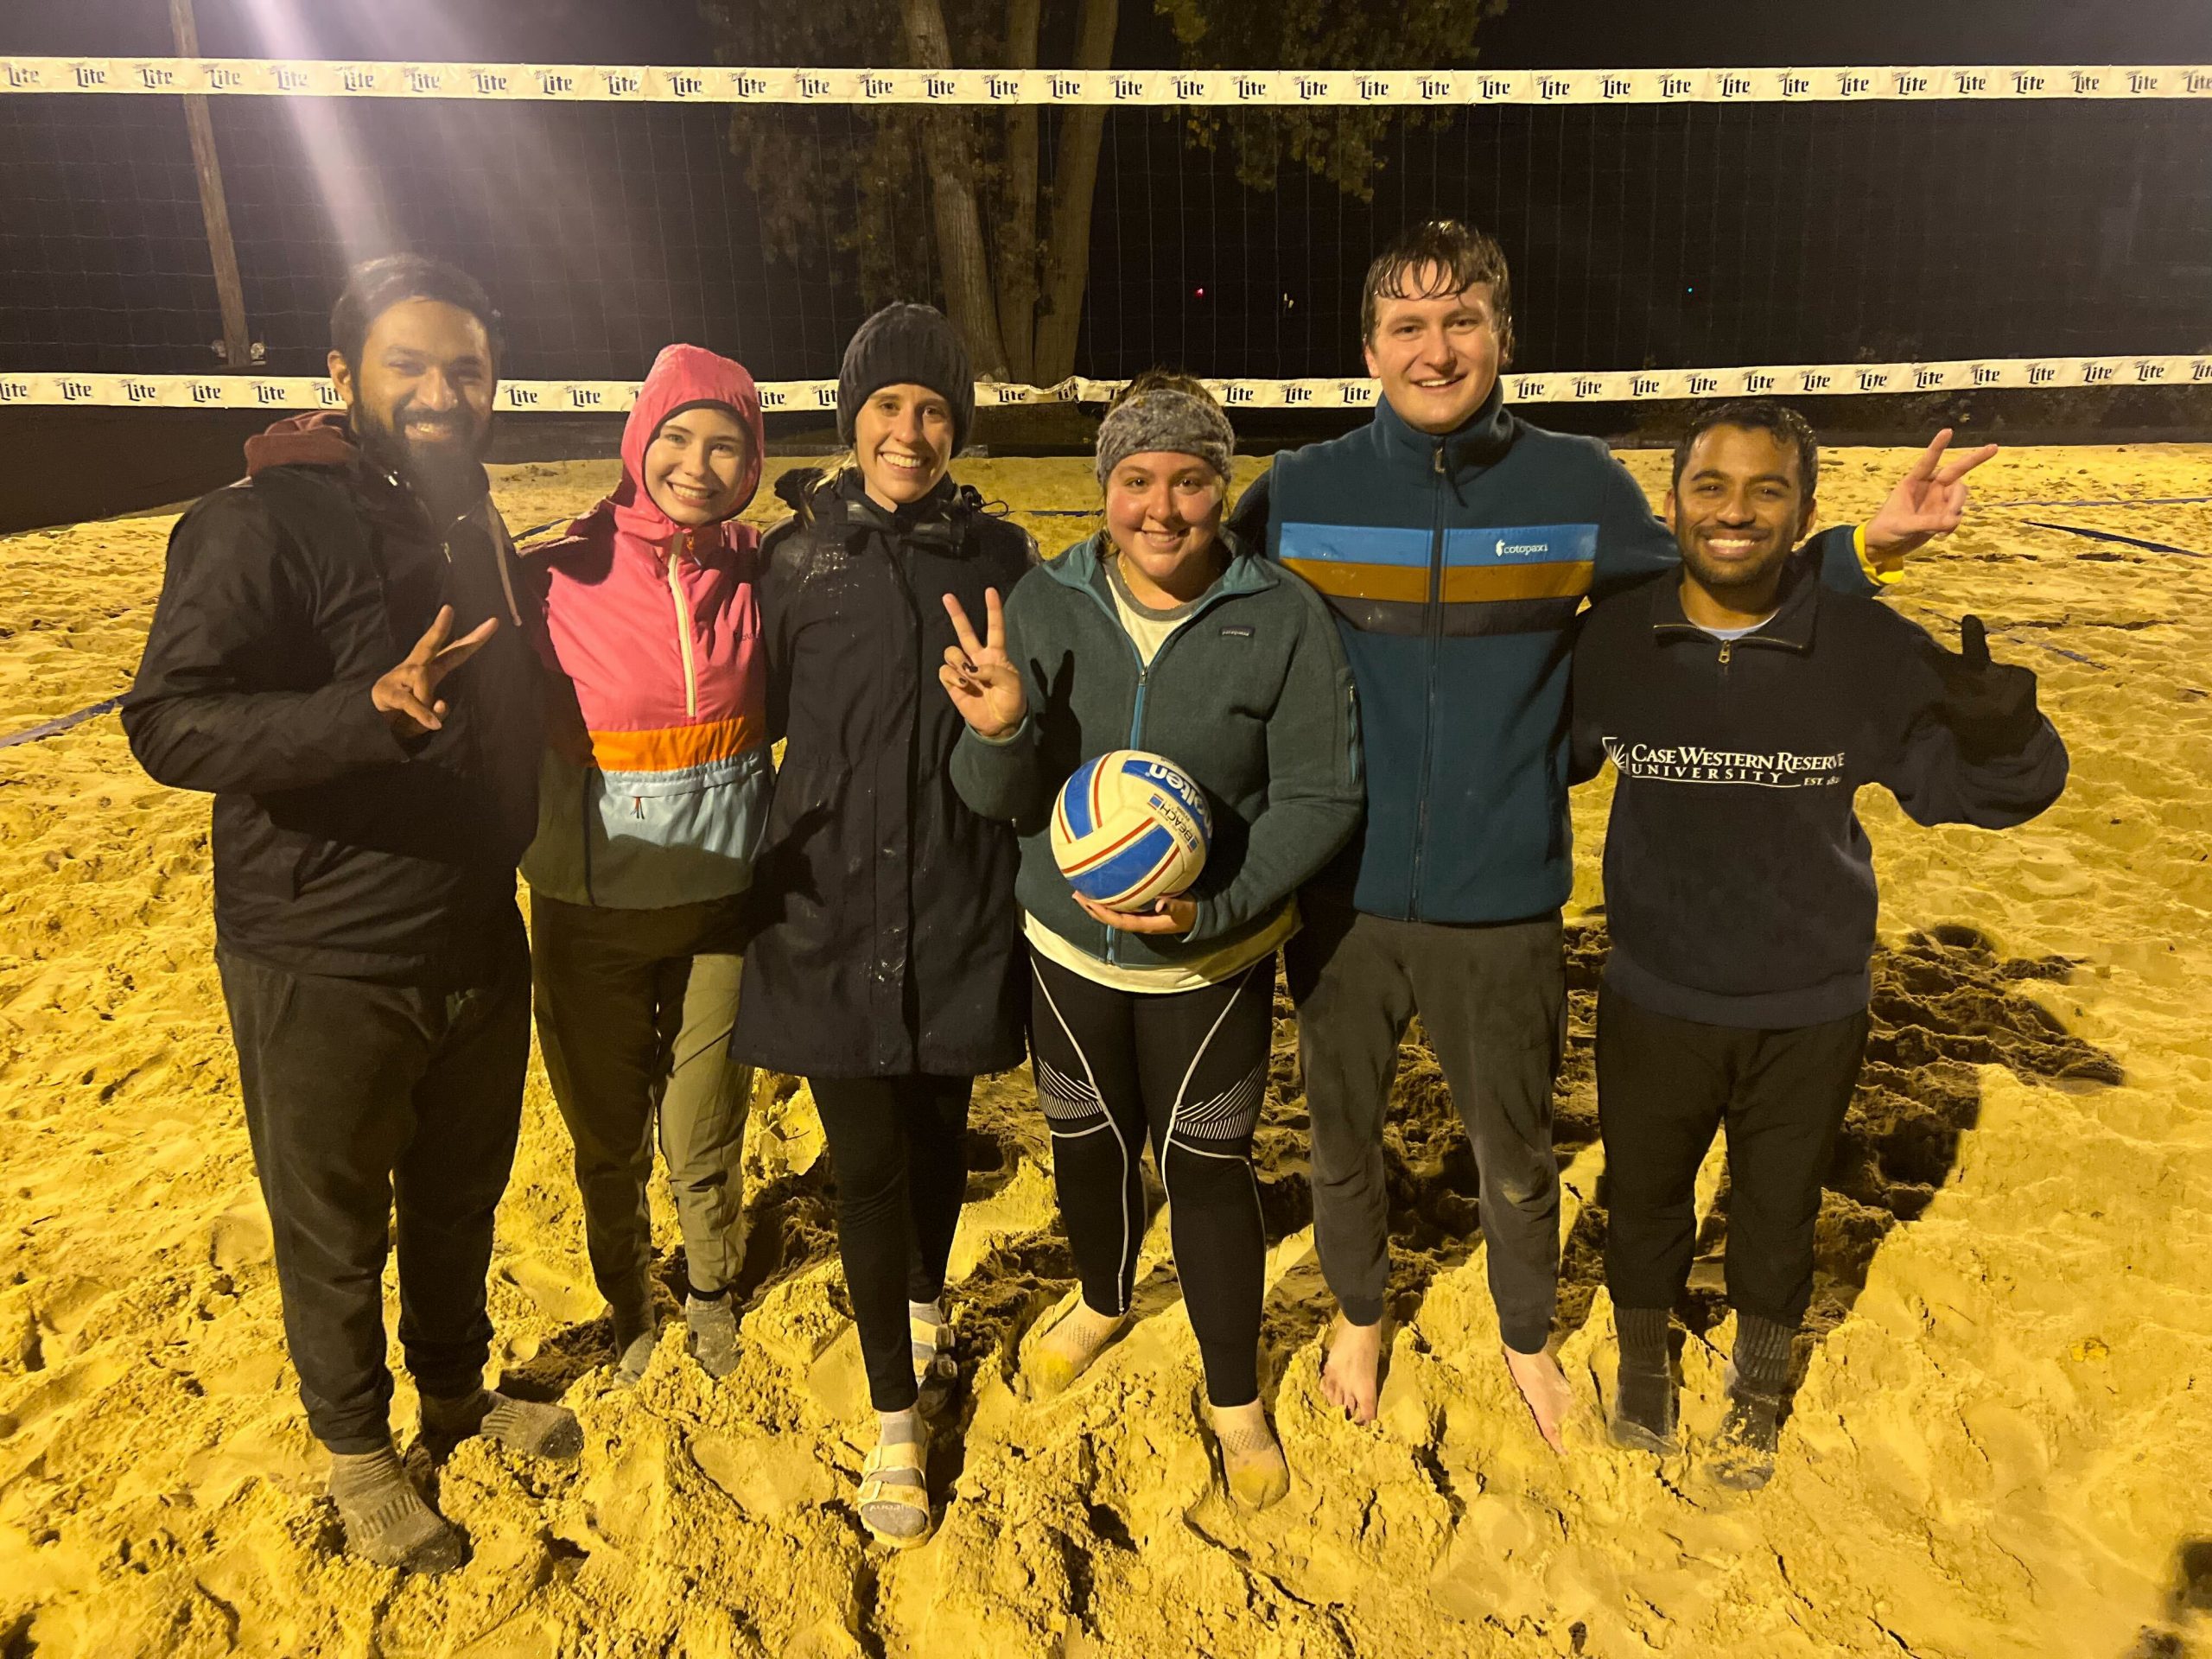 Newry's volleyball team, the One Hit Wonders - 2022 review